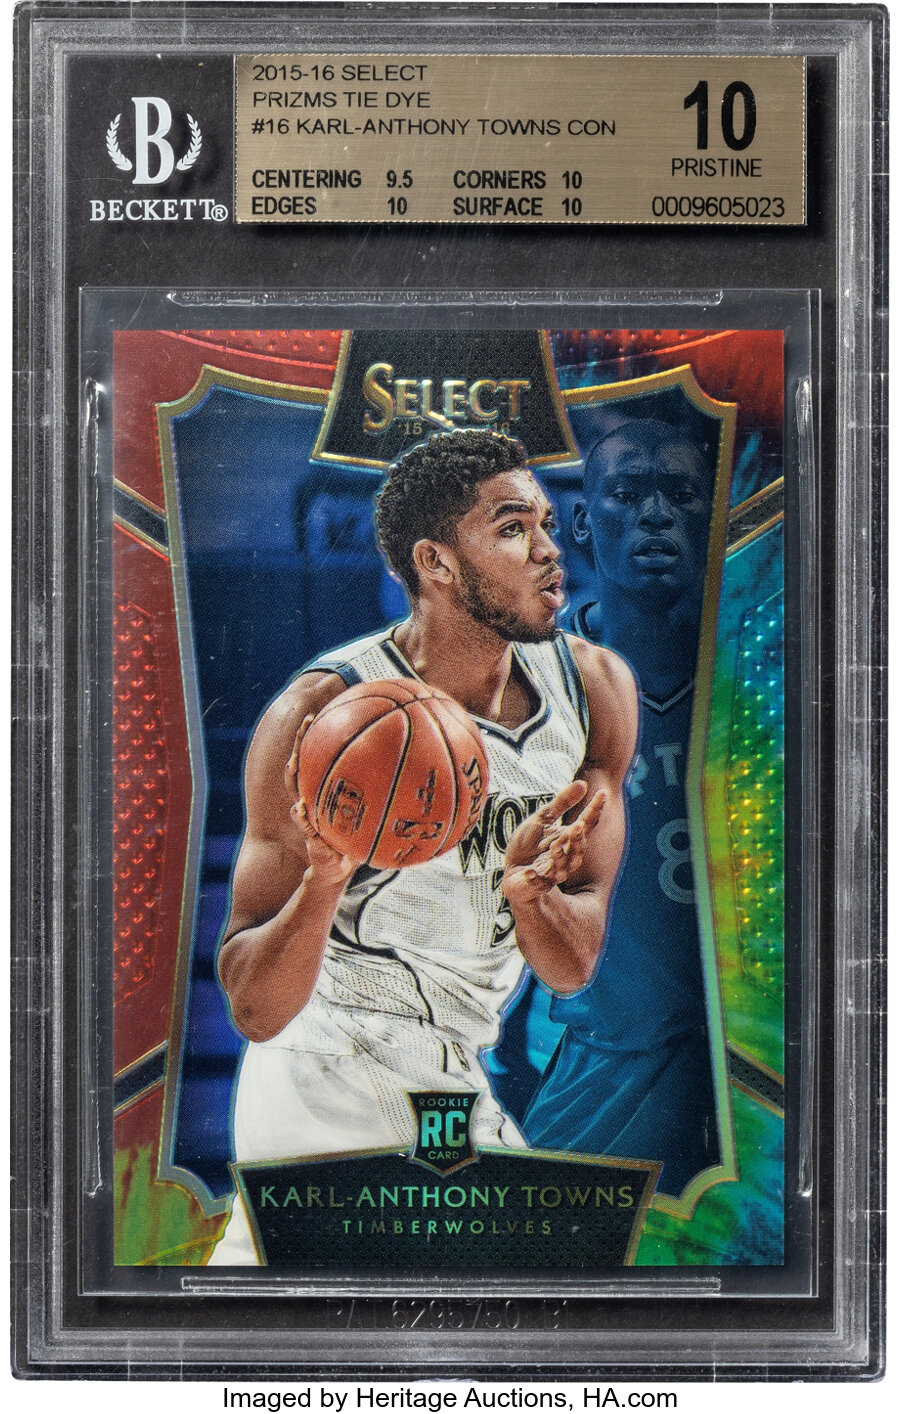 2015 Panini Select Karl-Anthony Towns (Tie-Dye Prizms) Rookie #16 BGS Pristine 10 - #'d 9/25